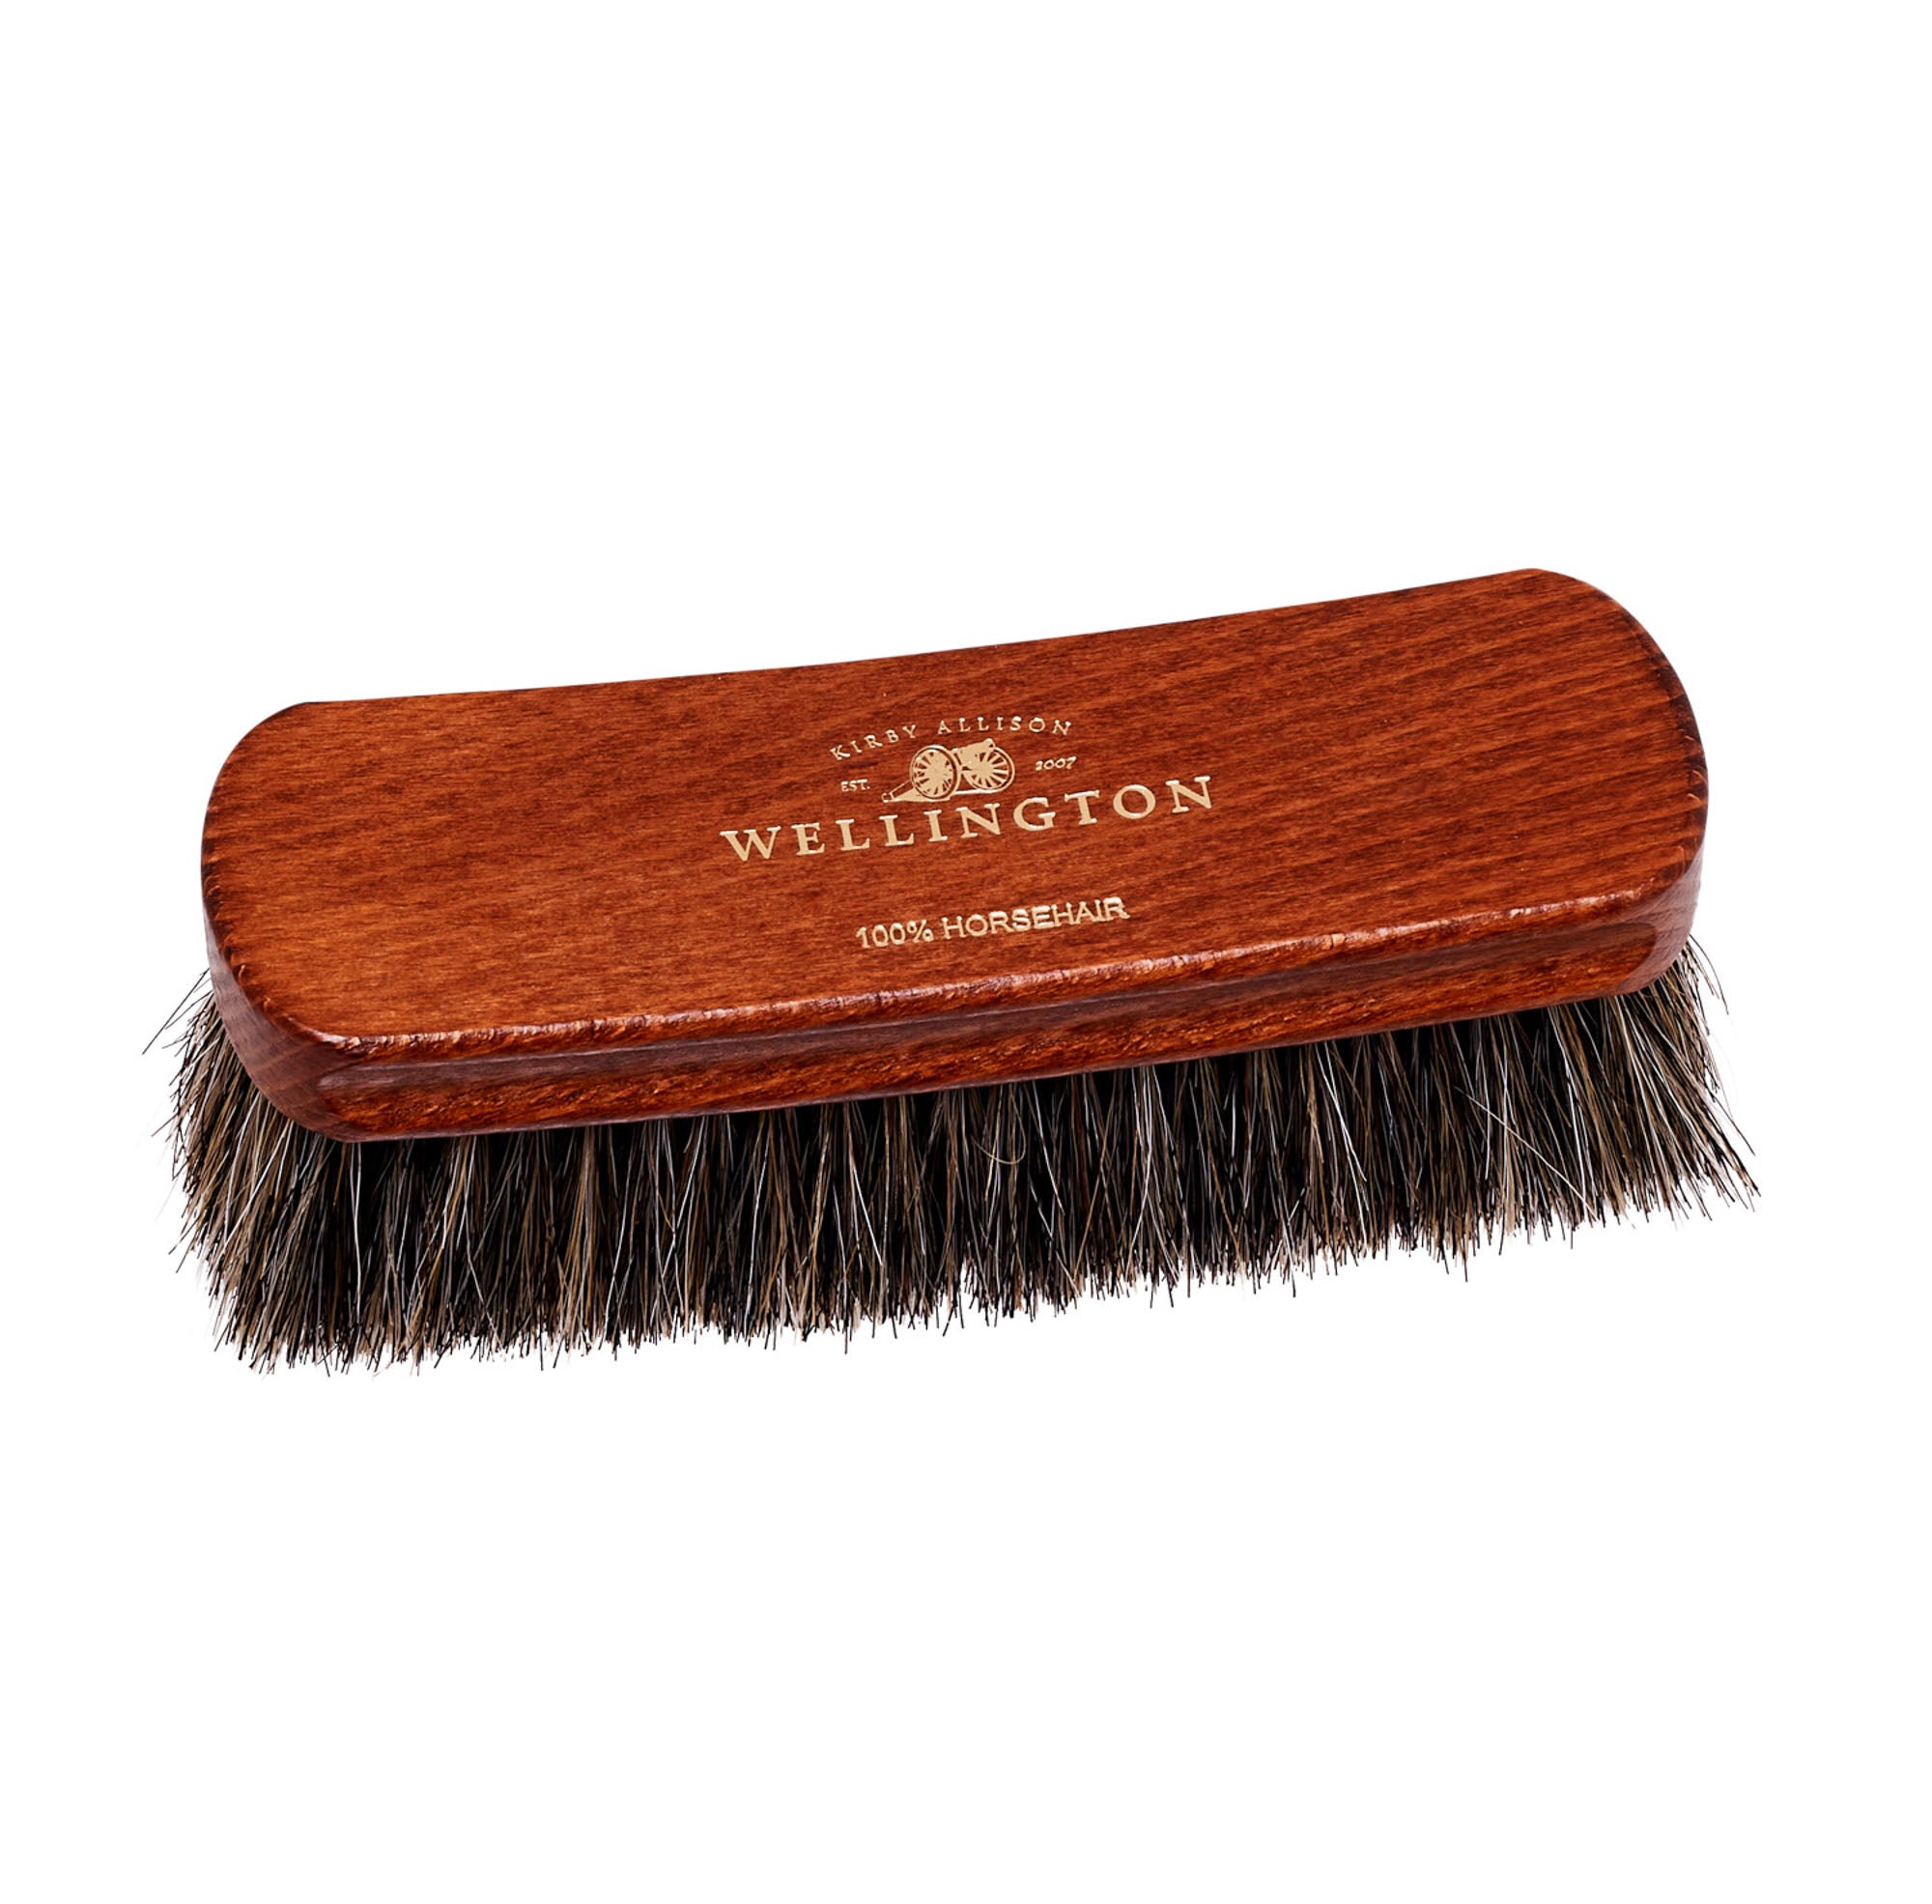 A Deluxe Wellington Horsehair Buffing Brush with the words KirbyAllison.com engraved on the wooden handle.